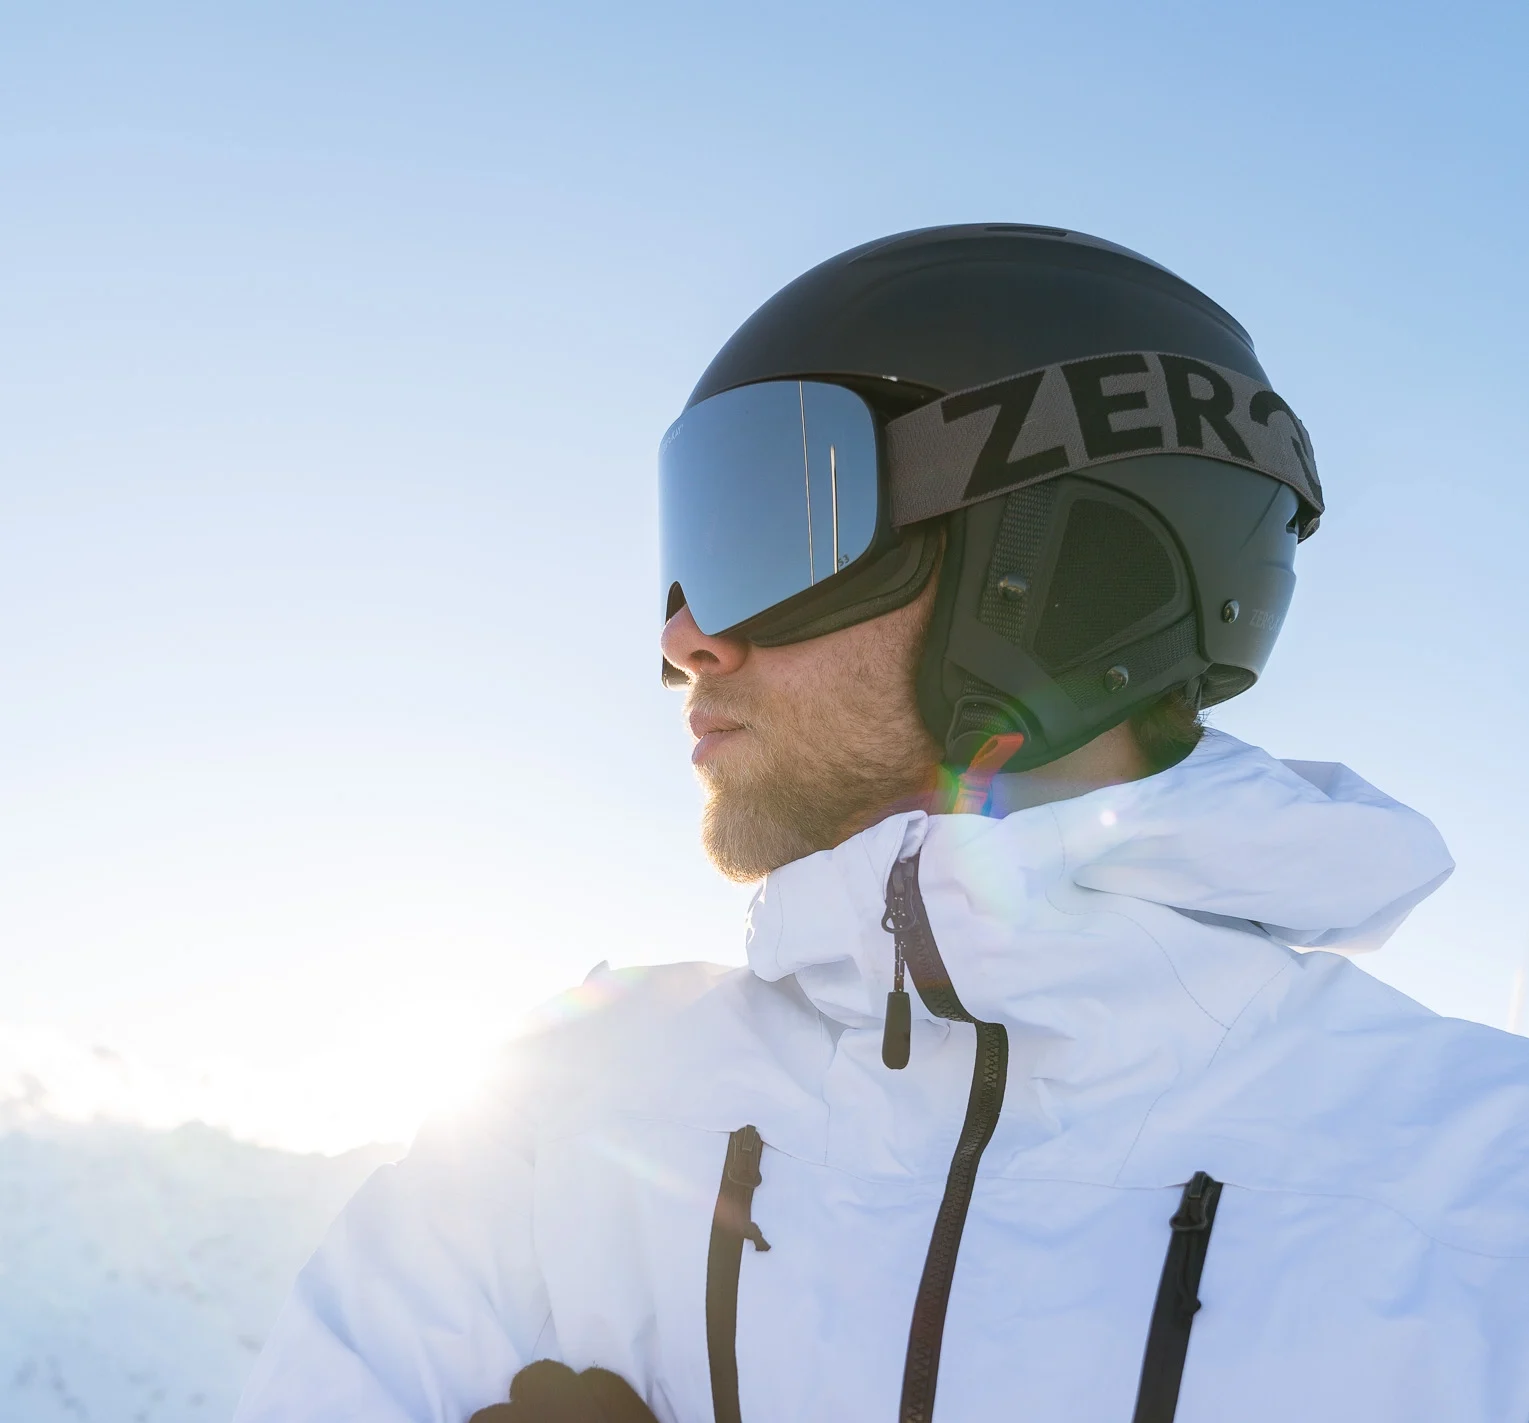 A professional skier poses at sunset on the summit of Titlis, wearing the Legend Edition black ski helmet and Icon Pro silver ski goggles. His sophisticated gear, set against the dramatic backdrop of the Swiss Alps' fading light, showcases a blend of protection and modern style, perfectly suited for the skier who demands performance and elegance on the slopes.